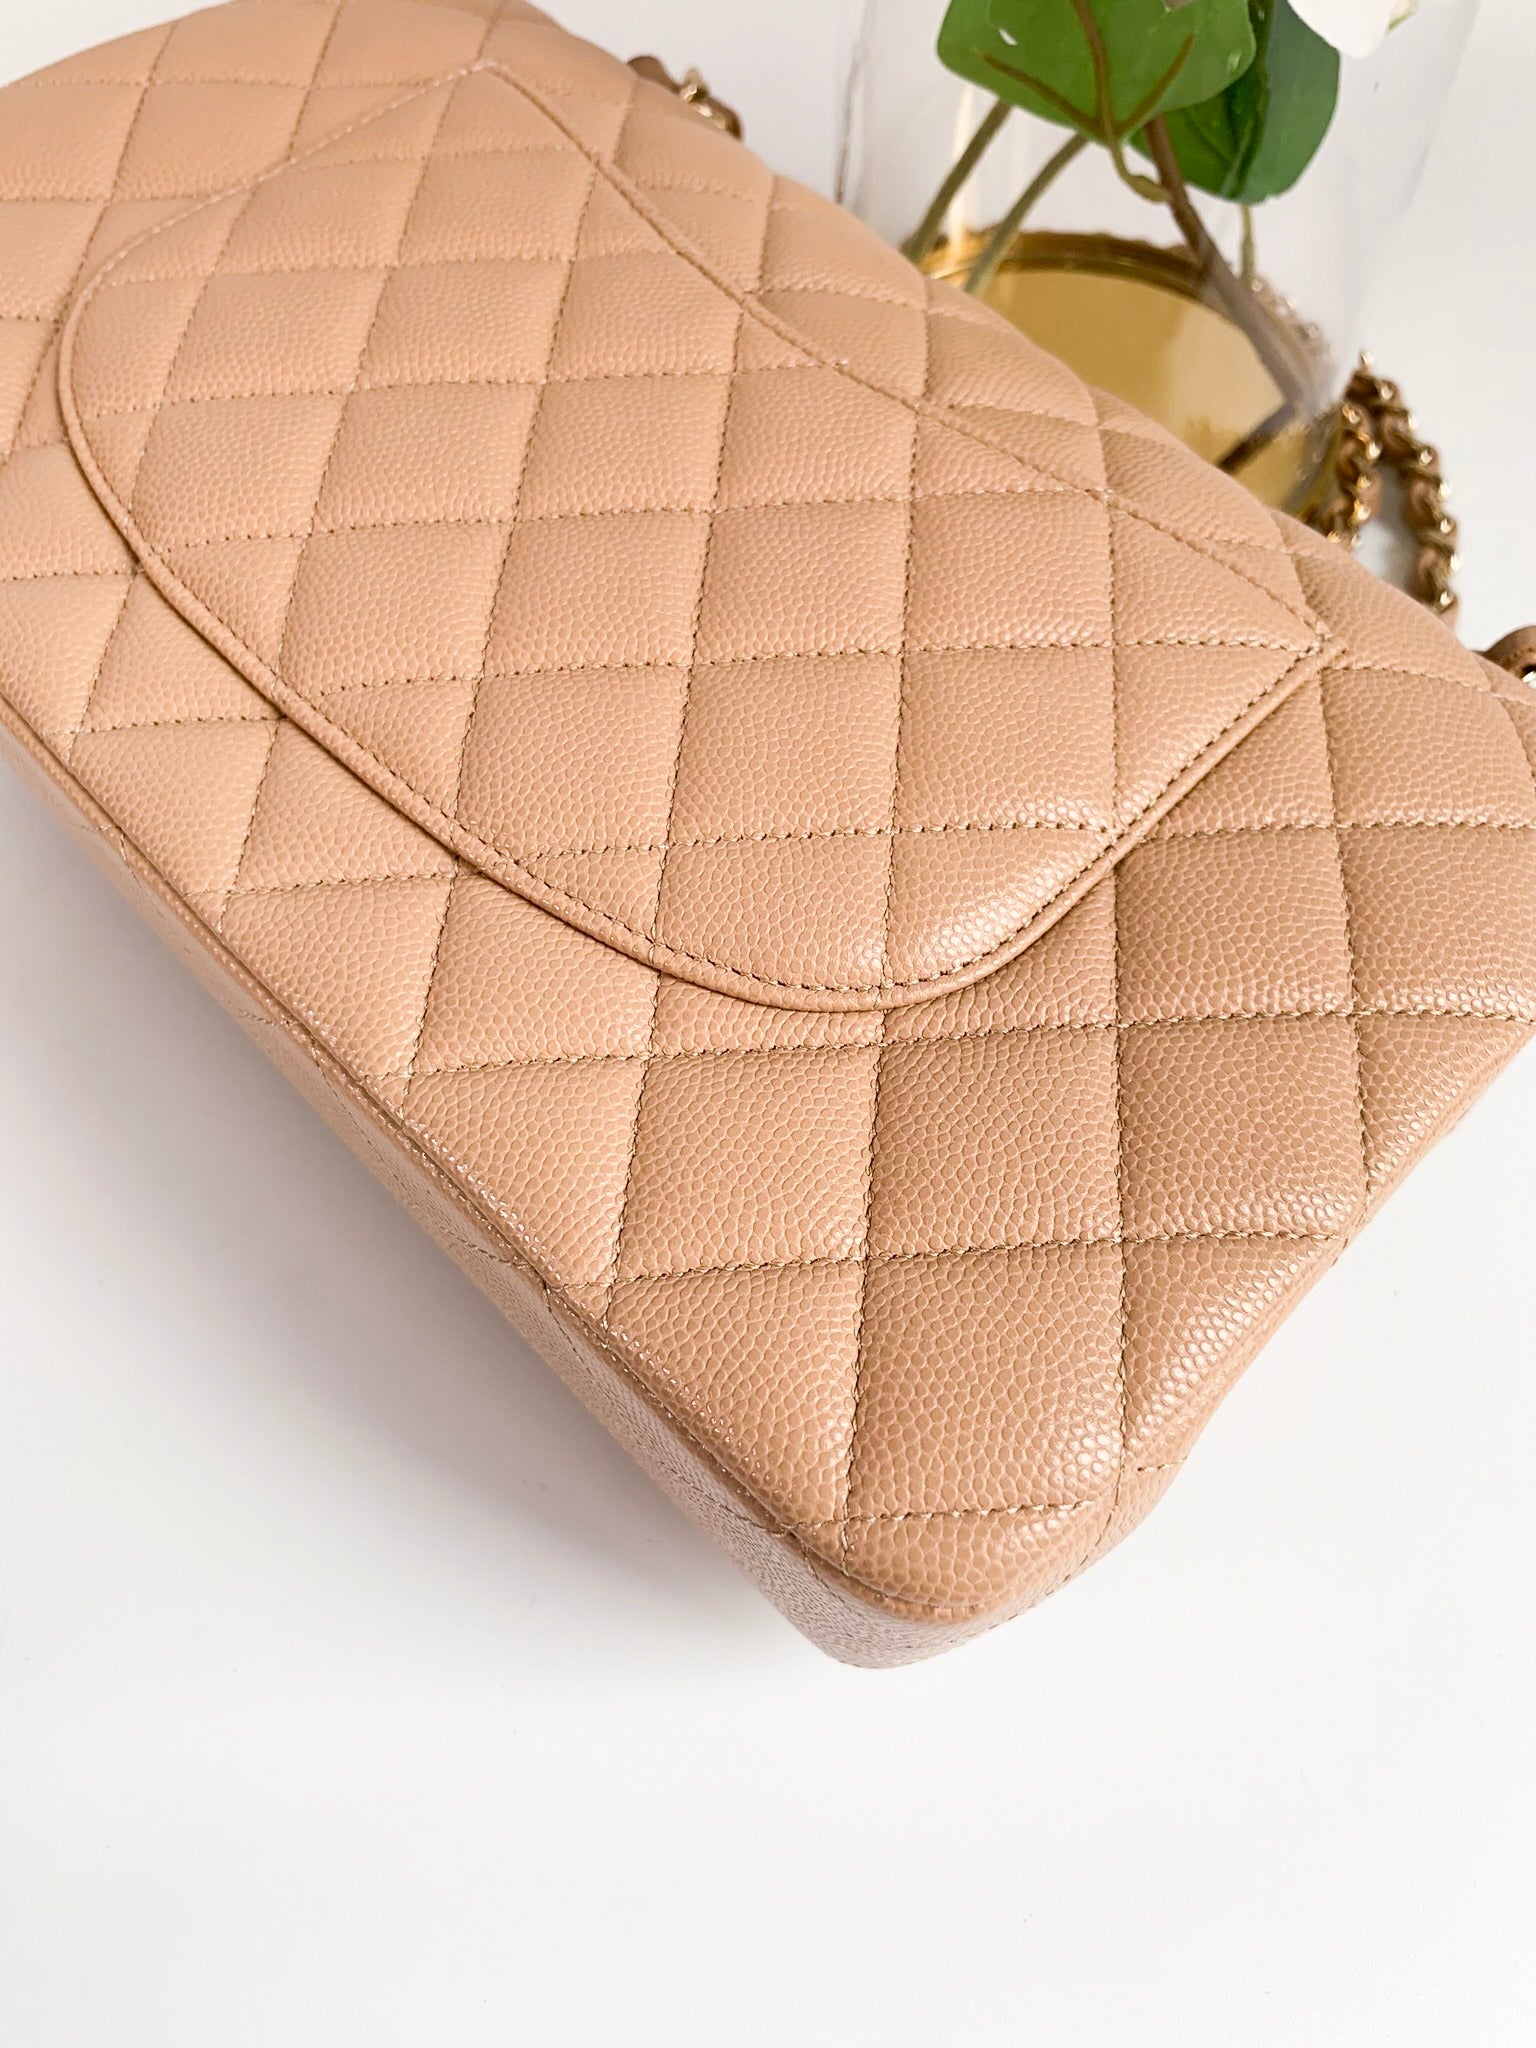 Chanel Caviar Quilted M/L Double Flap Beige Light Gold Hardware 19B – Coco  Approved Studio